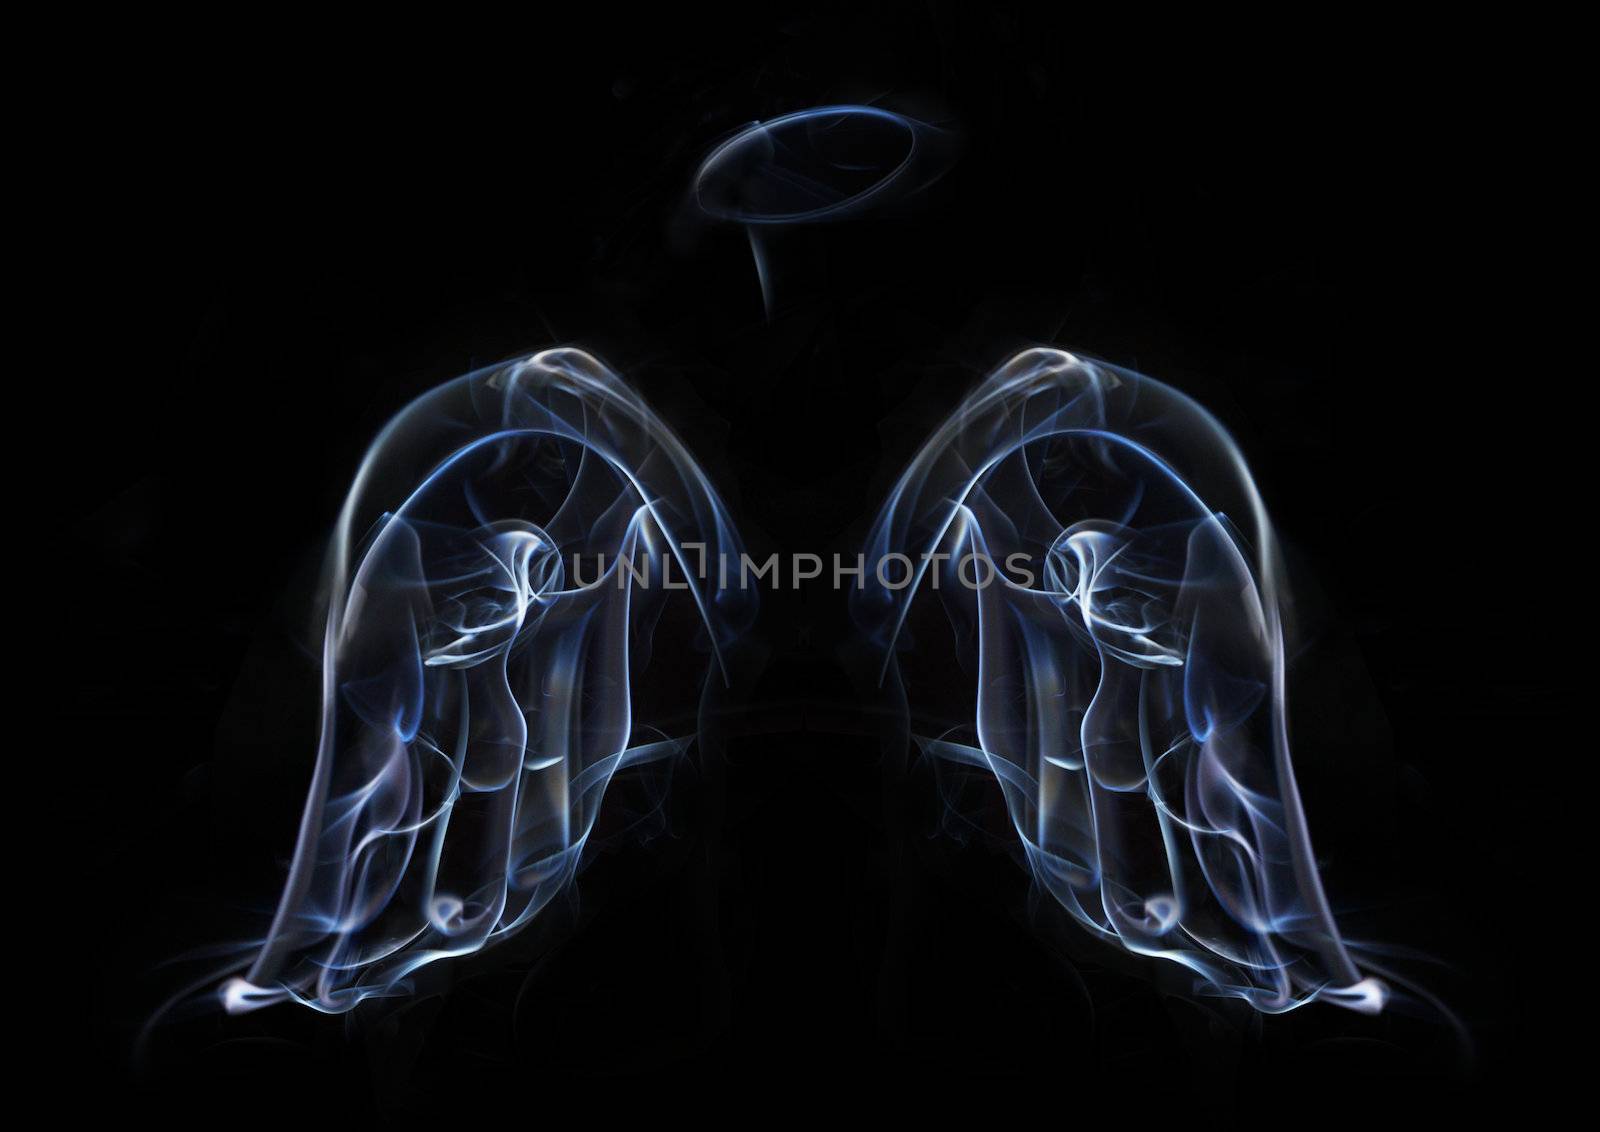 The two wings of angels, and a halo of smoke on a black background